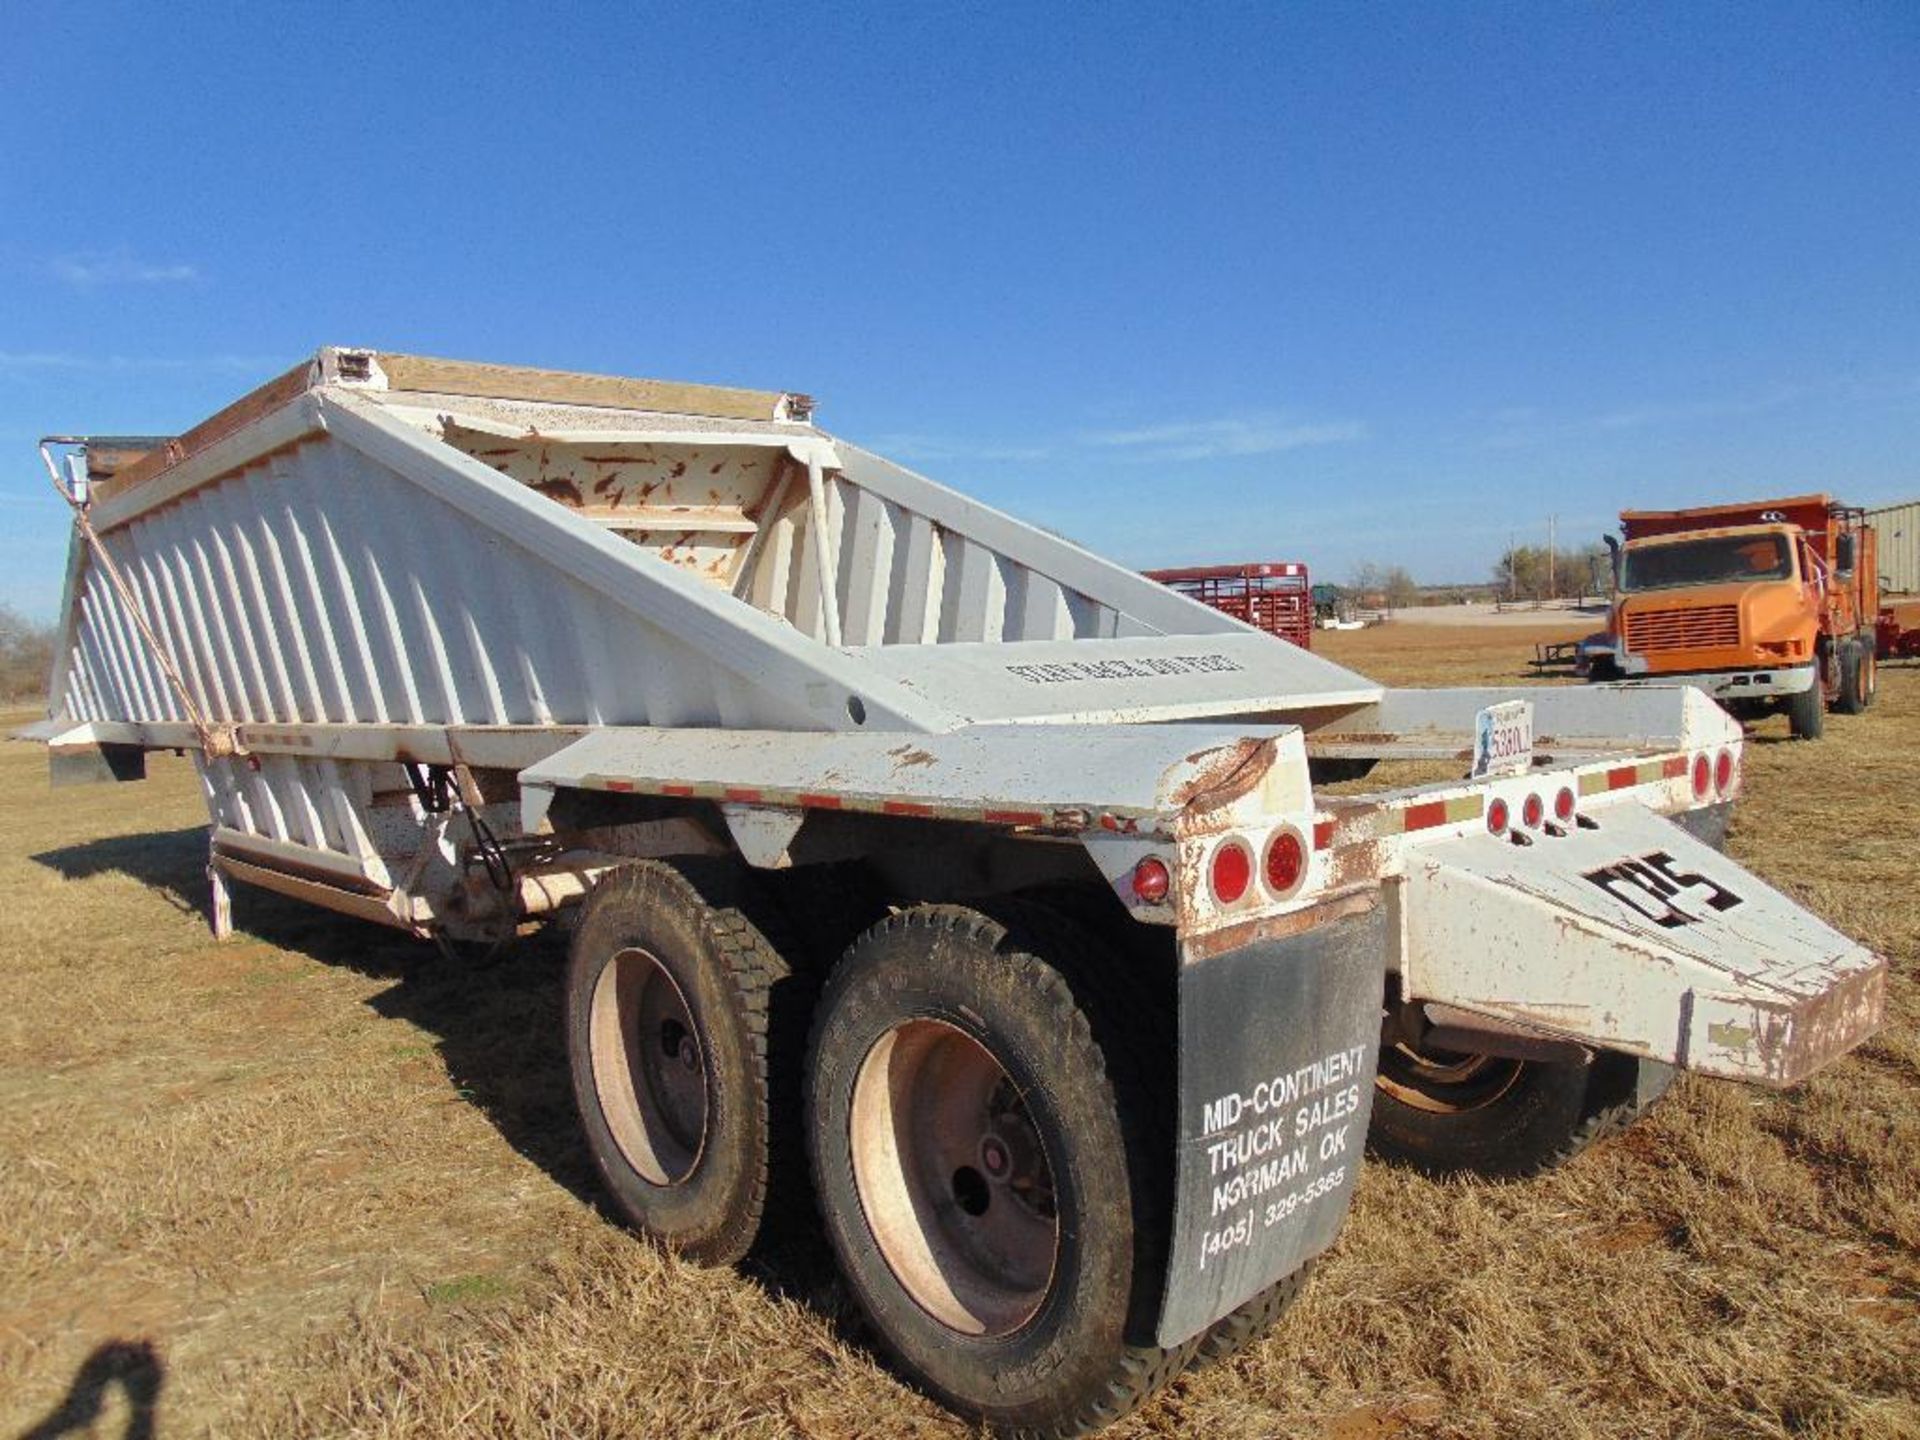 2000 CPS T/A Singlegate Belly Dump Rock Trailer, s/n 4z411163xyp003144, - Image 8 of 8